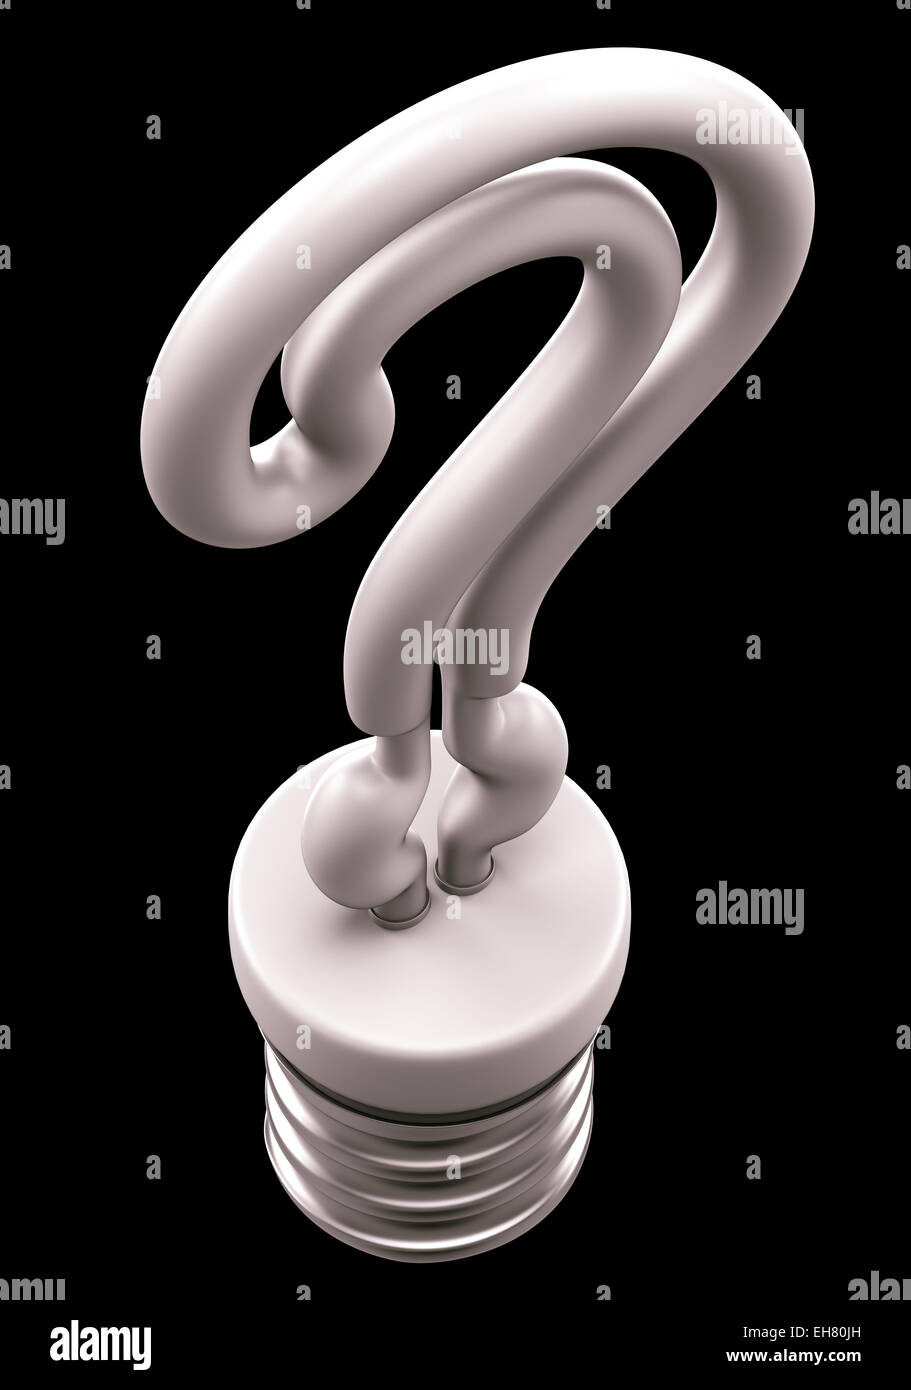 Question: Query mark light bulb isolated over black background Stock Photo